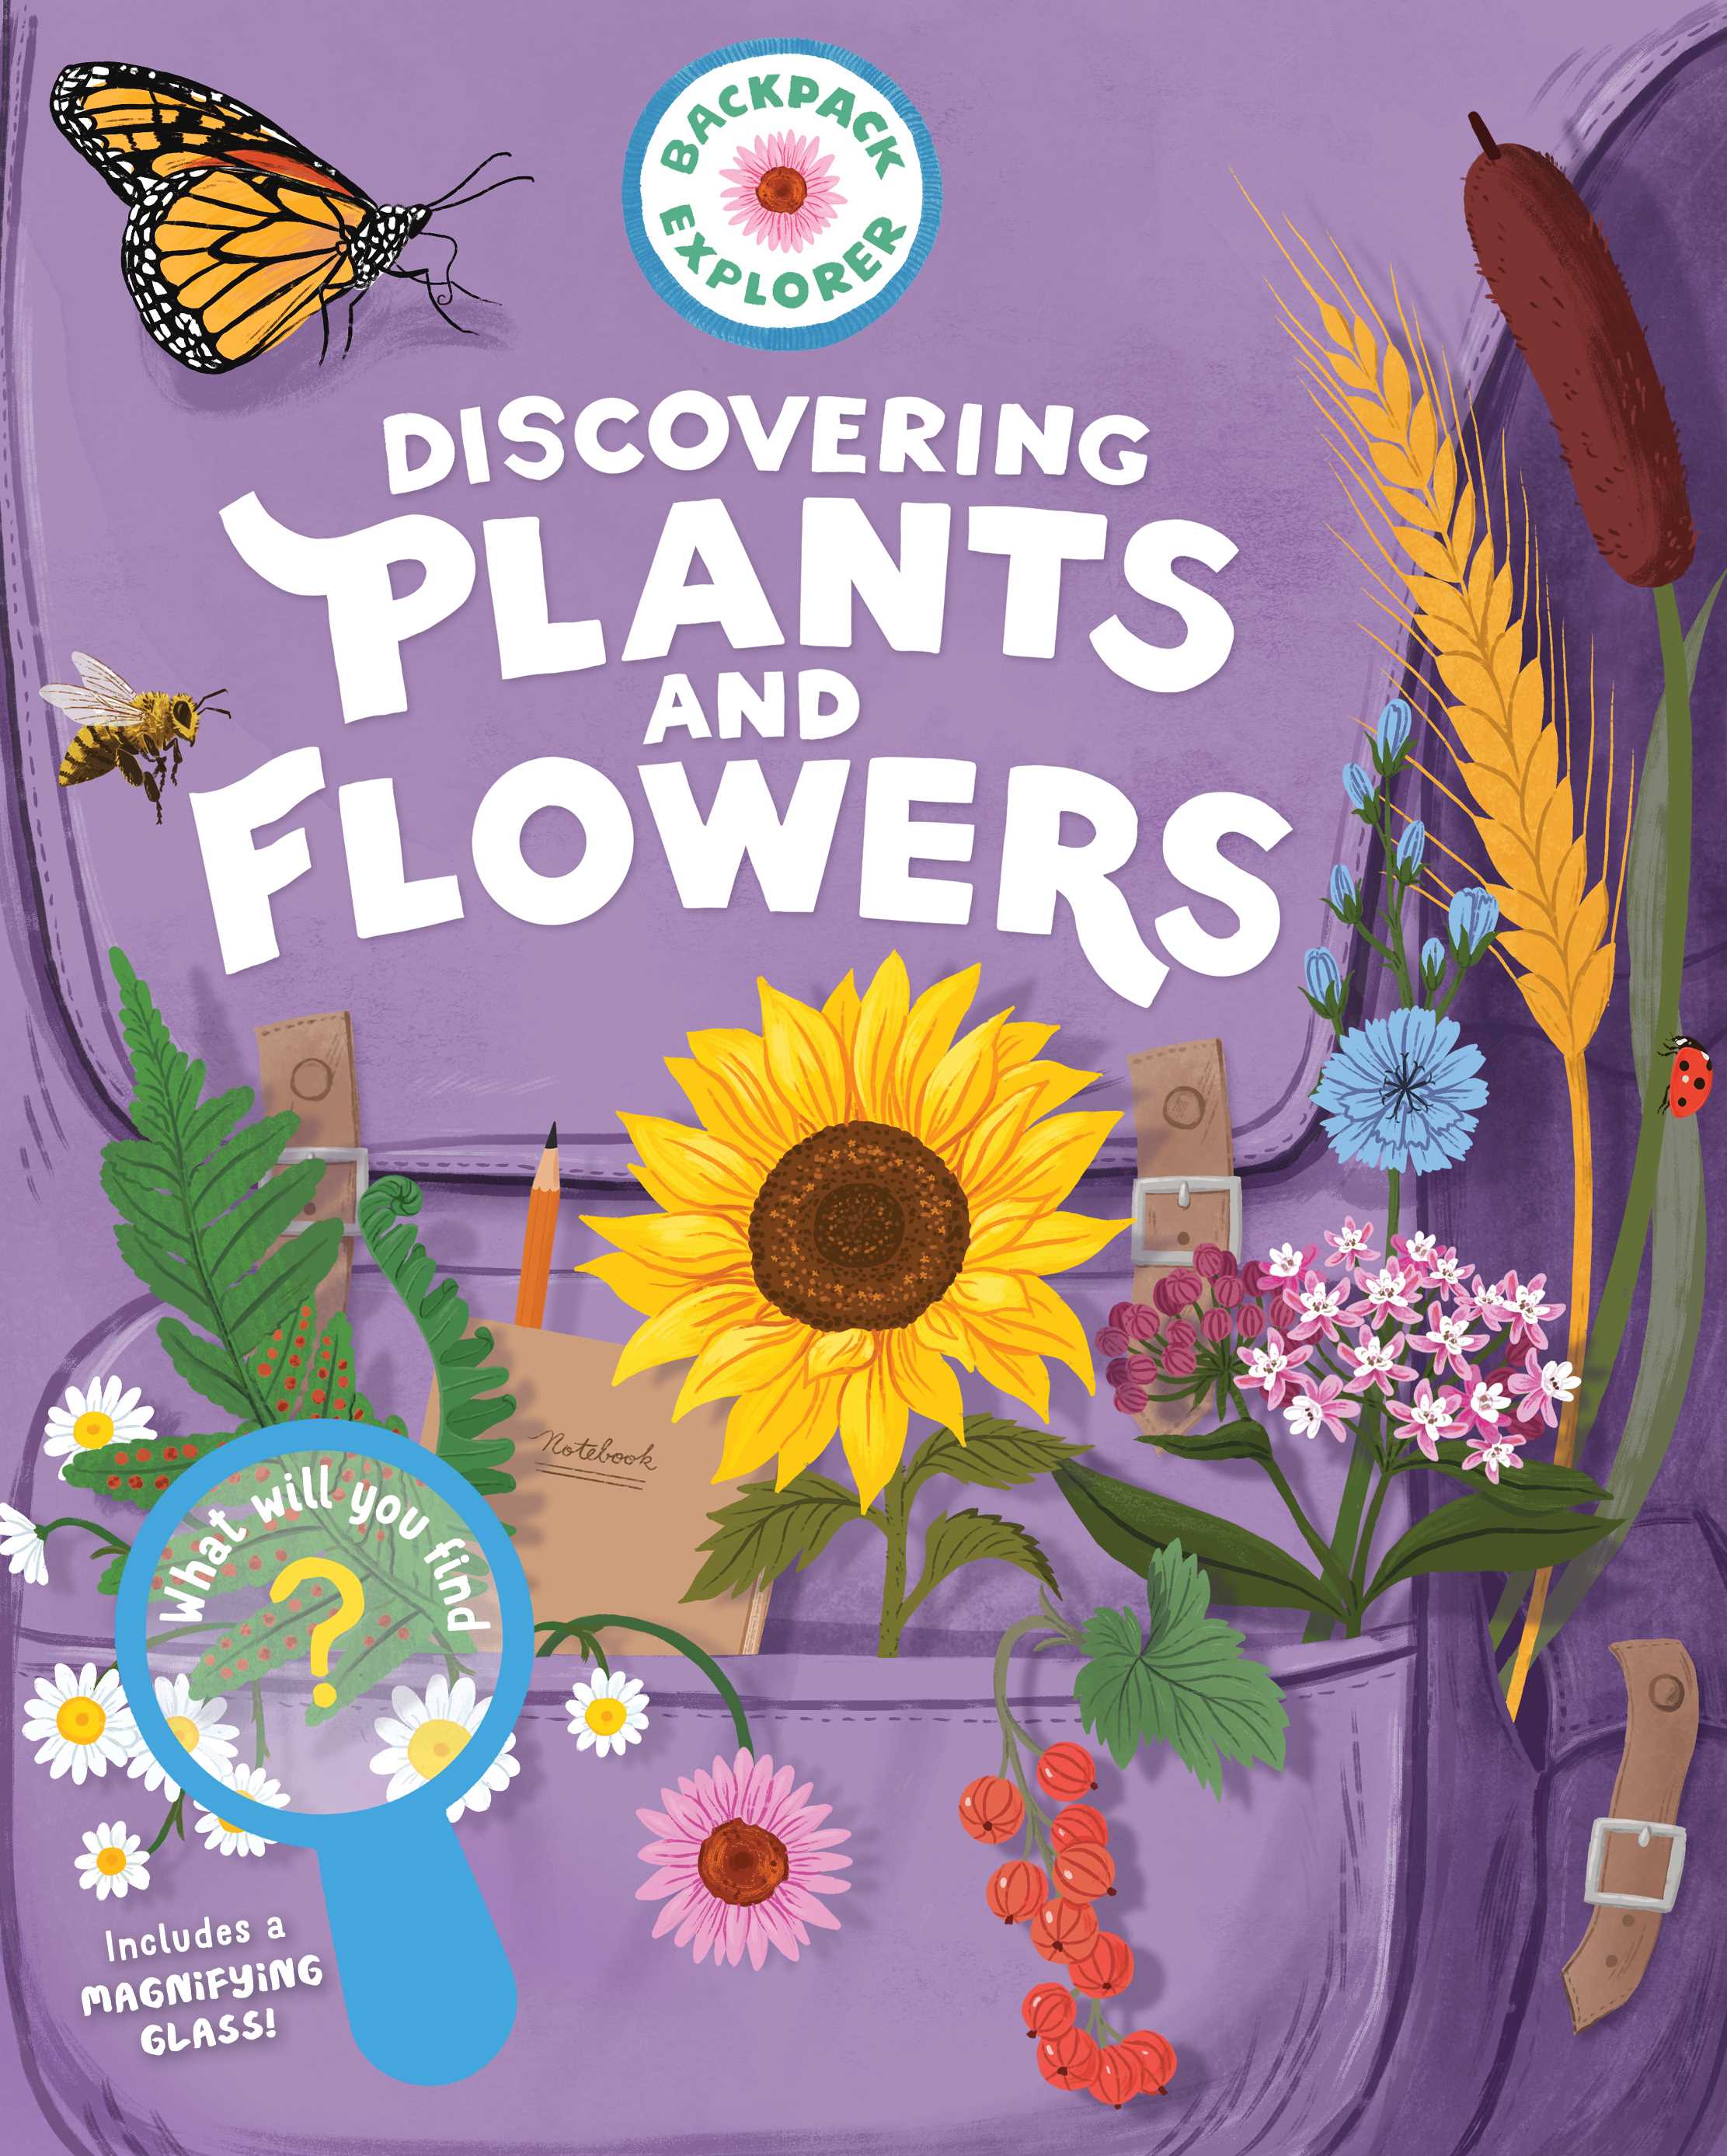 Discovering Plants and Flowers (Backpack Explorer)